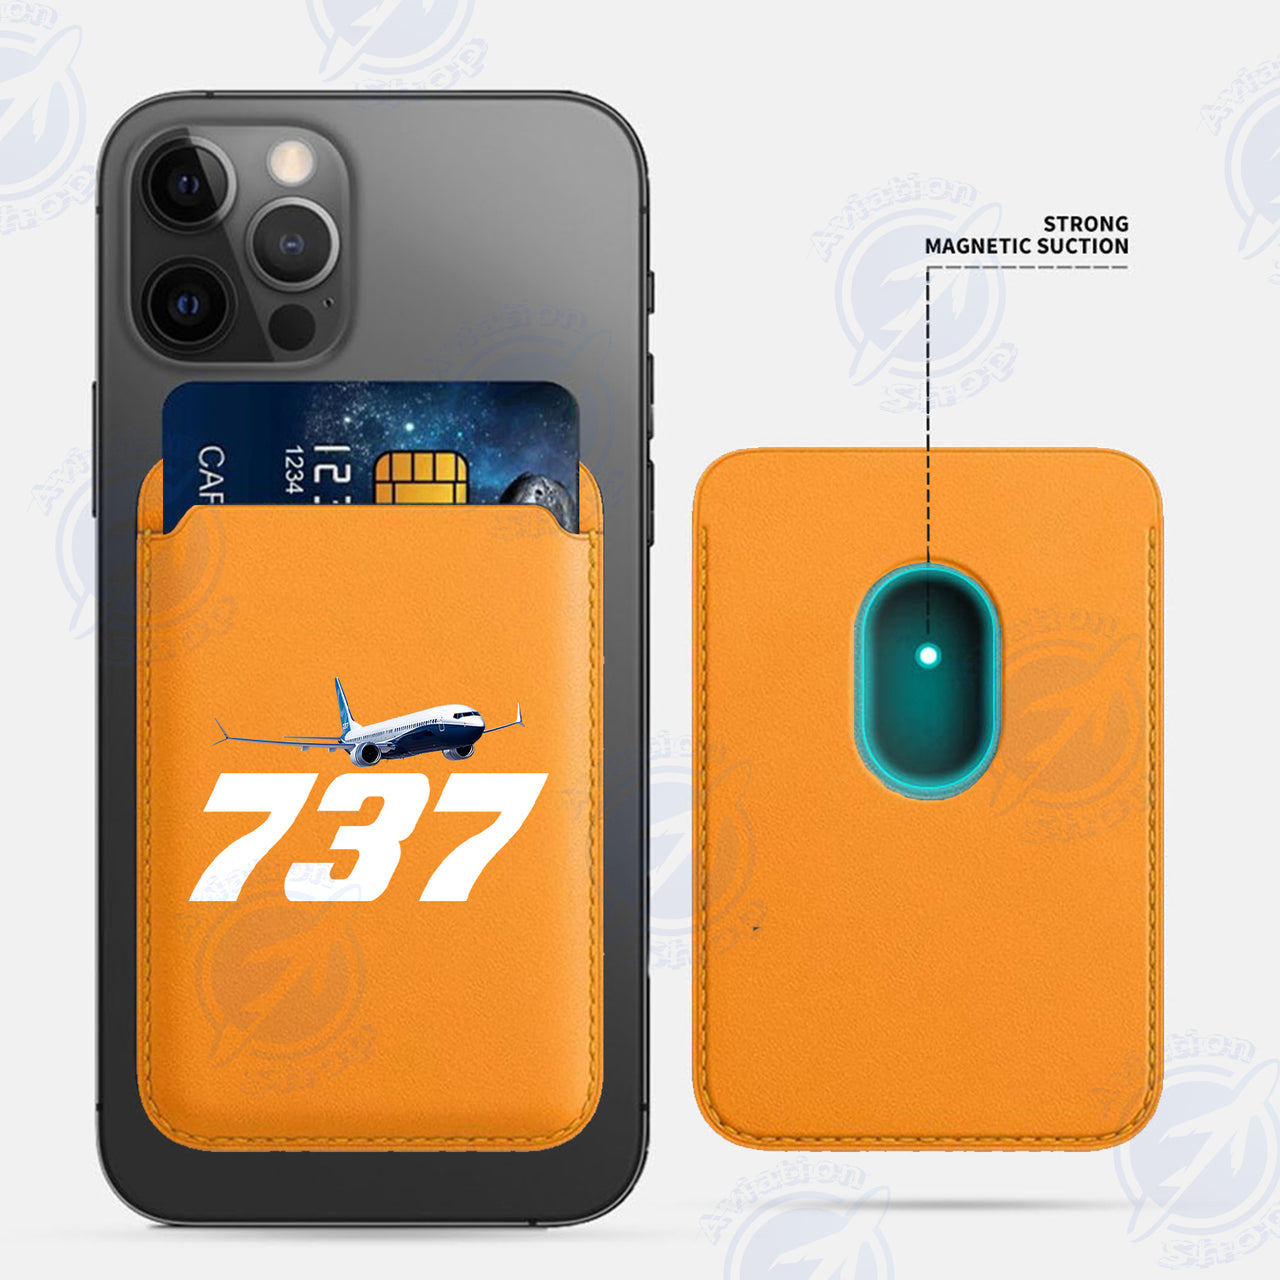 Super Boeing 737-800 iPhone Cases Magnetic Card Wallet